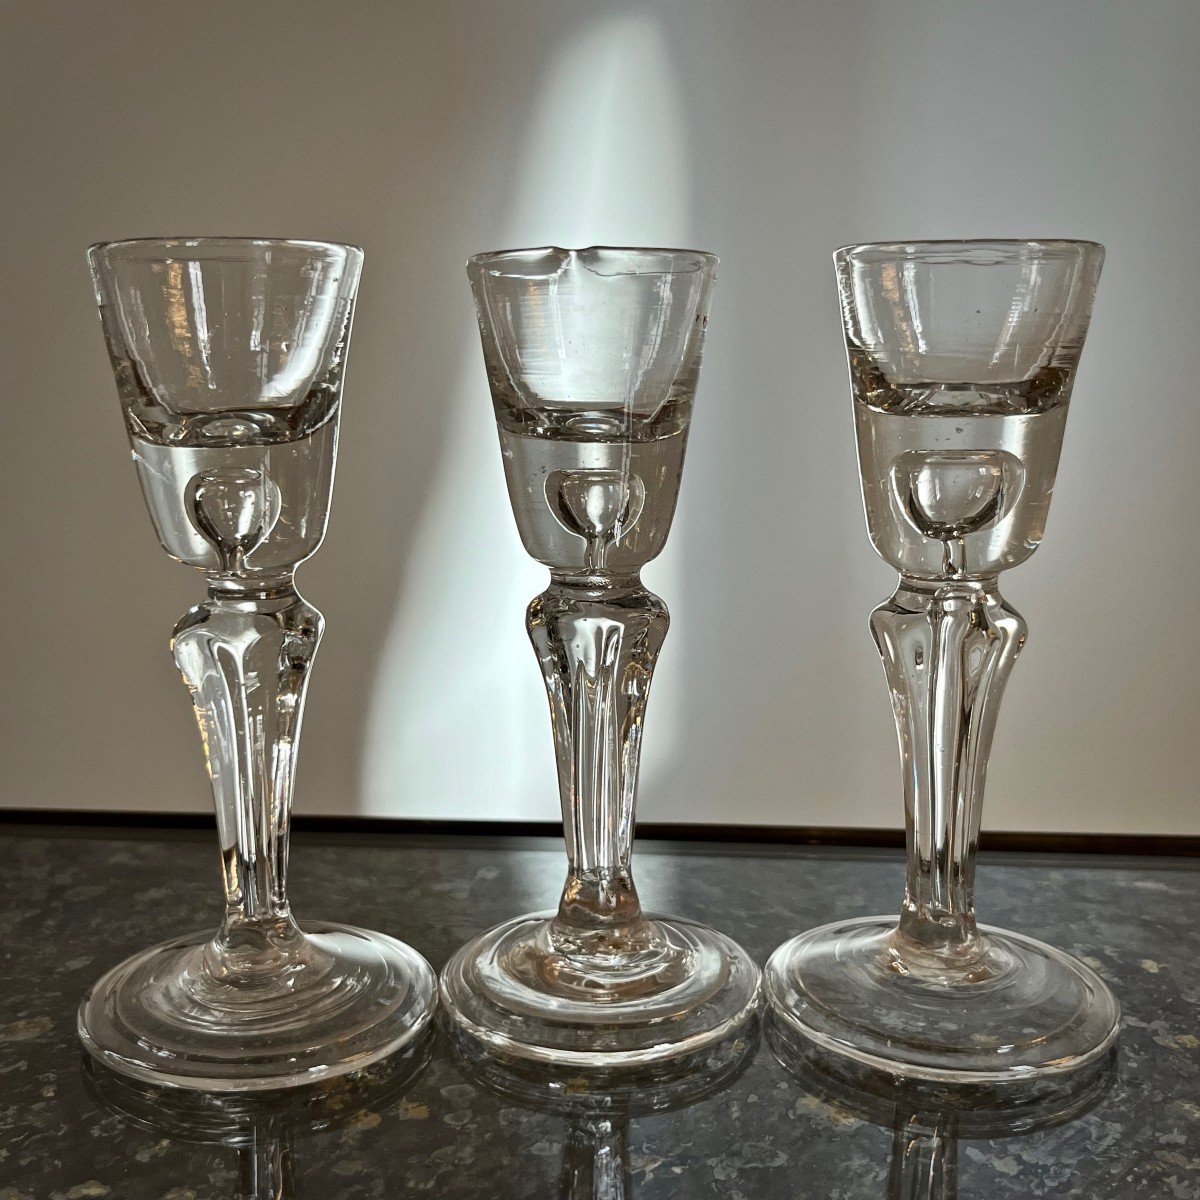 Three Small Liqueur Glasses With Hexagonal Legs In Blown Glass From The 18th Century 18th-photo-2